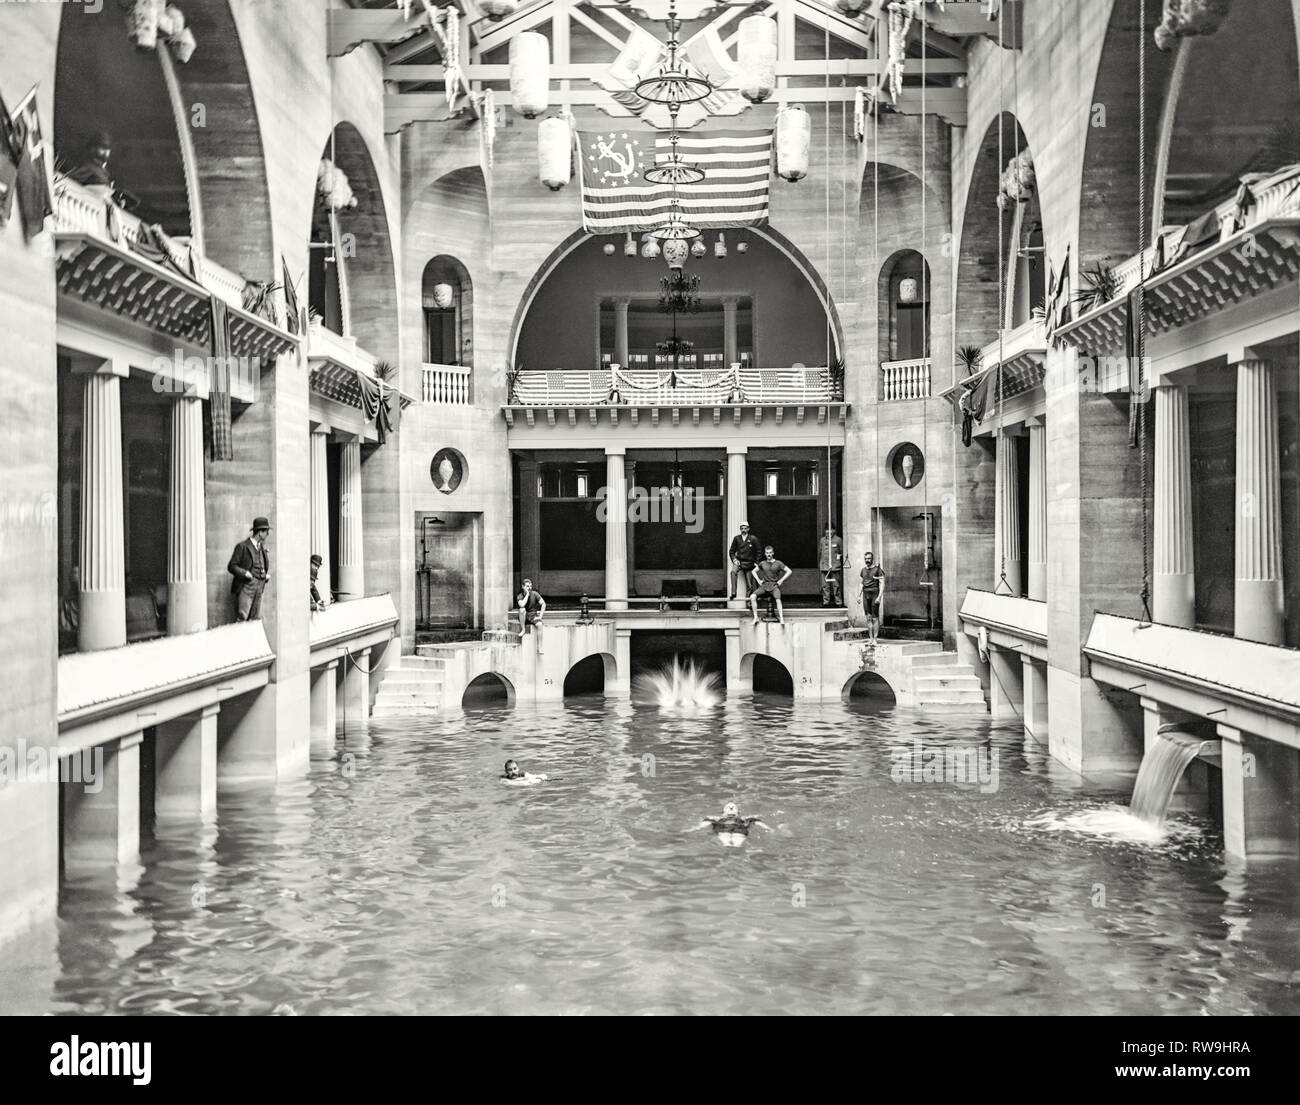 The Casino swimming pool with gentlemen in period swimwear at The Alcazar Hotel, Saint Augustine Florida circa 1890. This was the largest indoor swimming pool in the world fed from natural sulphur water well. Stock Photo